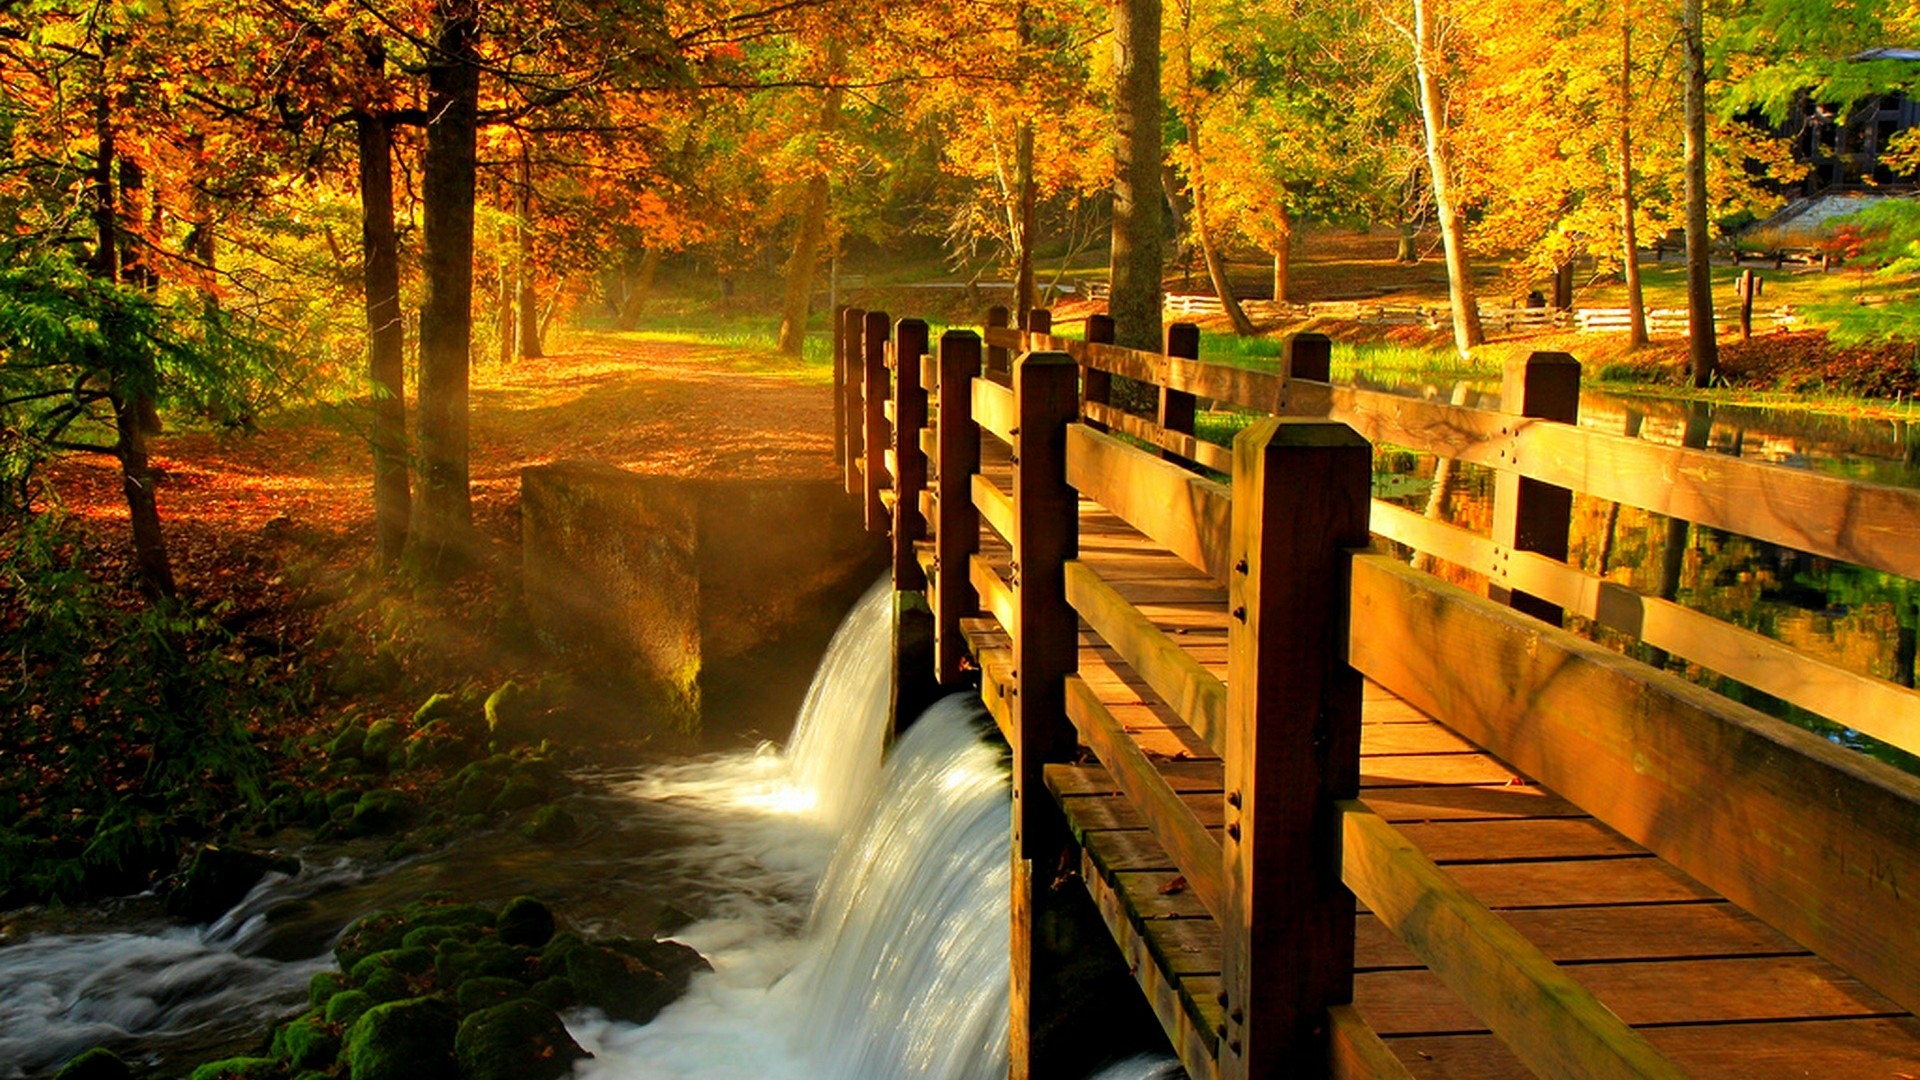 Wood Bridge Over The Stream At Fall Wallpaper Backiee